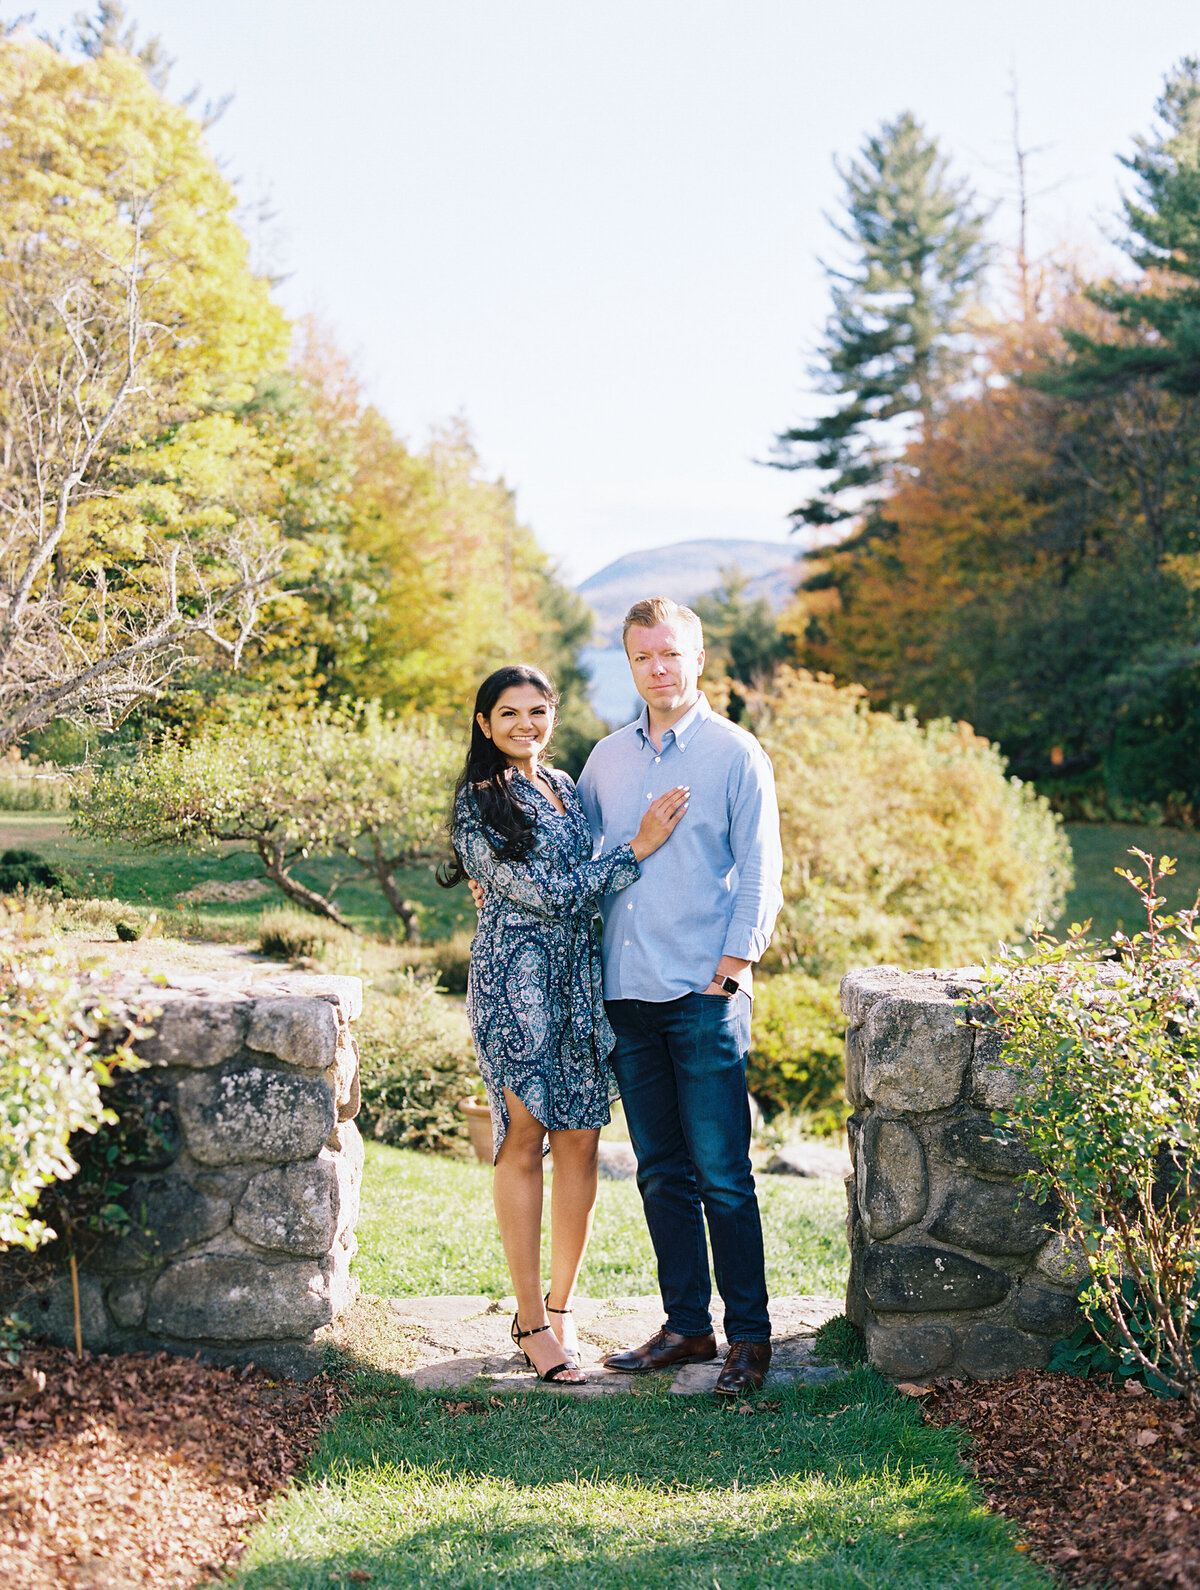 Engagement session in New England